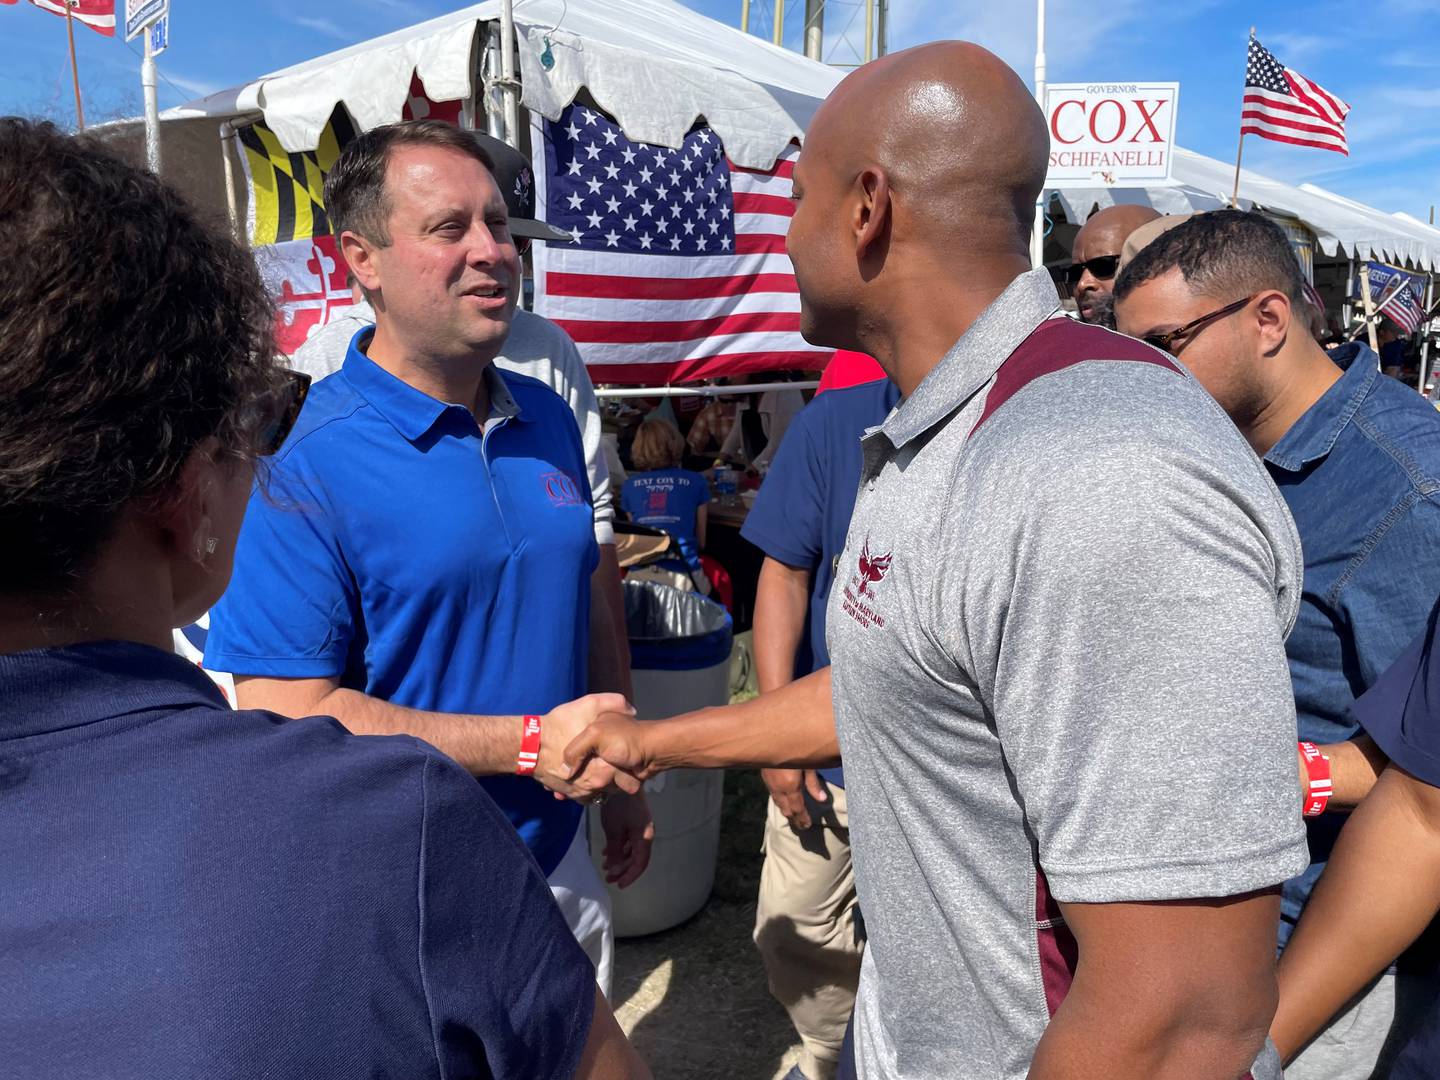 Dan Cox, in a blue shirt, shakes hands with Wes Moore, in a gray shirt, in front of a tent with Maryland and United States flags.